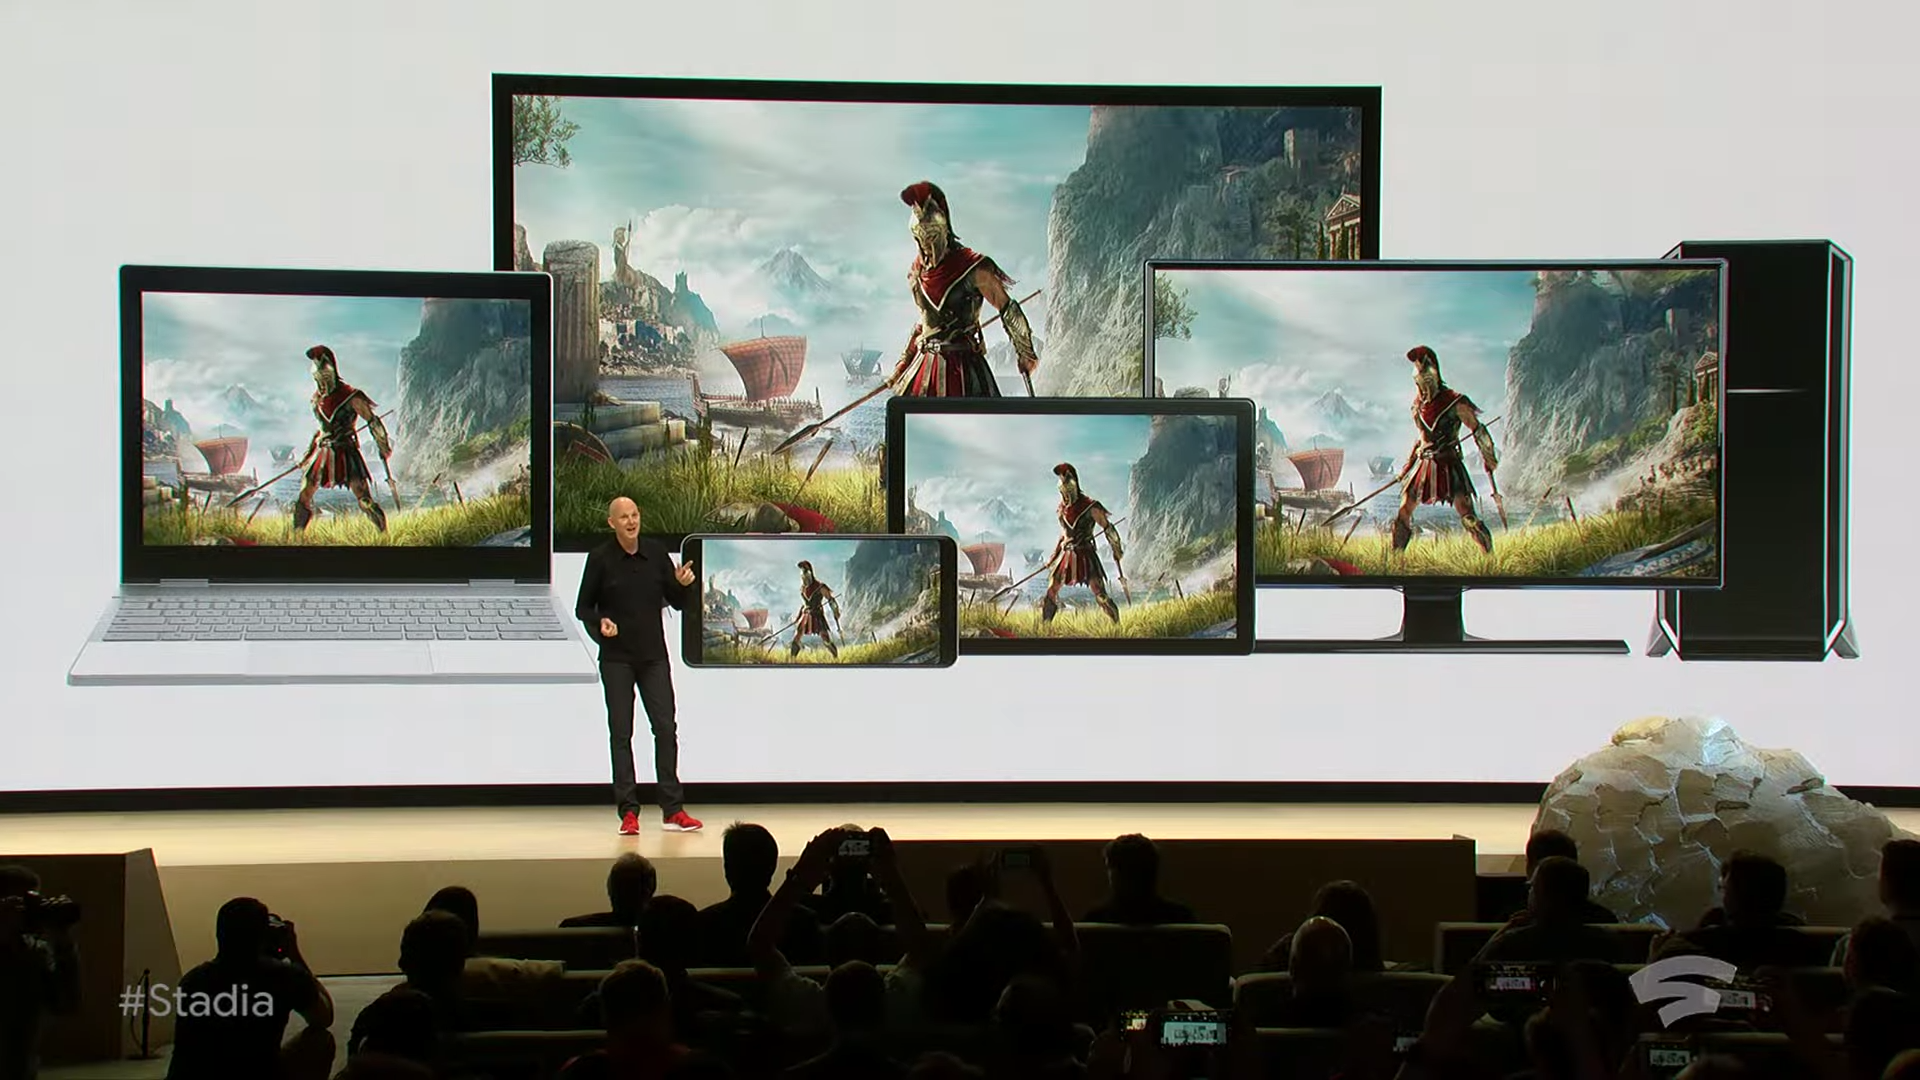 Destiny 2, Hitman, and Assassin’s Creed devs want to help Google Stadia players